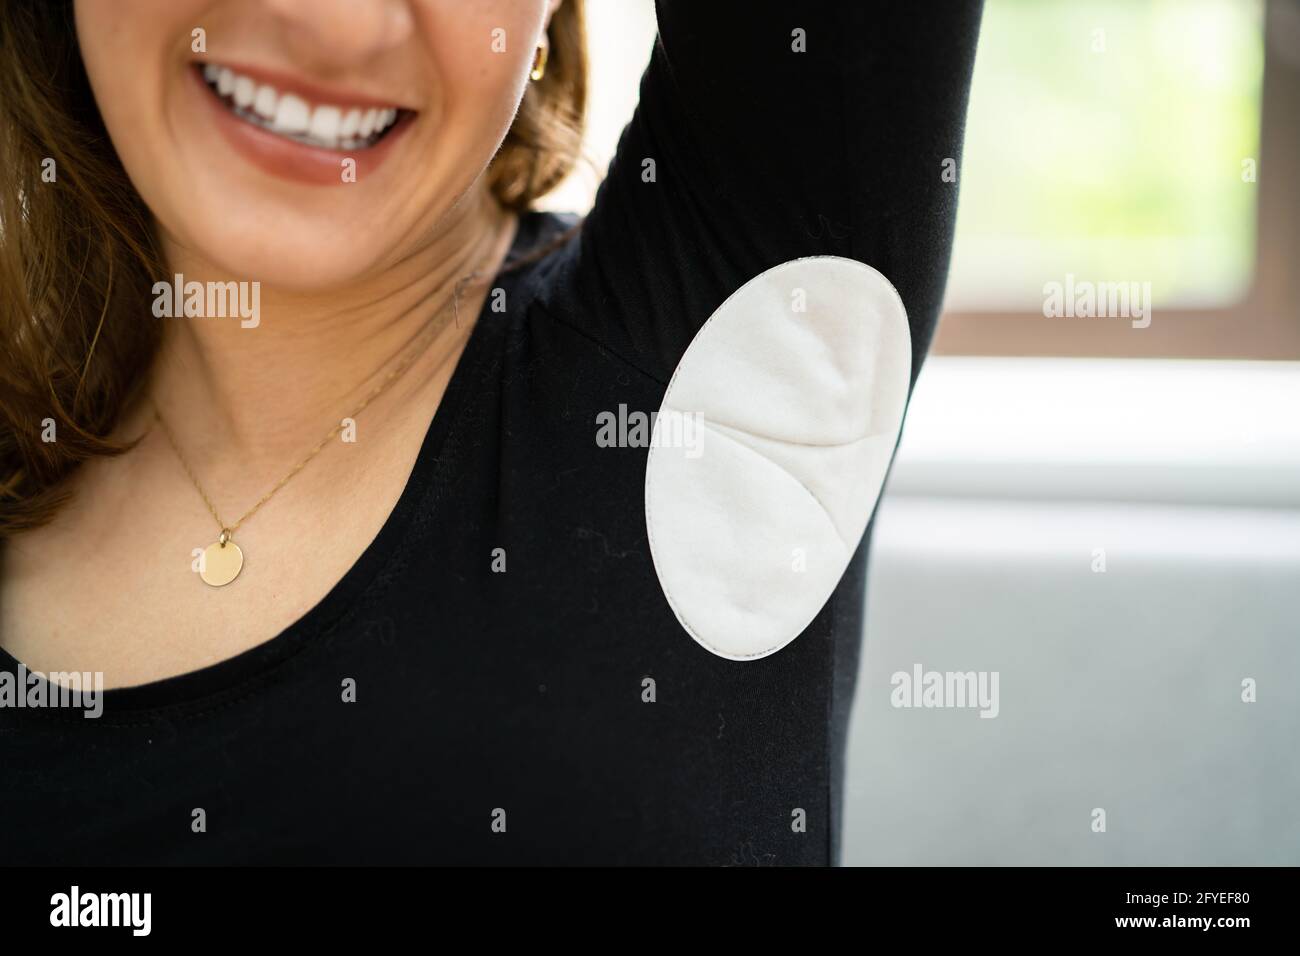 Underarm Sweat Patch Or Pad To Prevent Odor And Sweat Marks Stock Photo